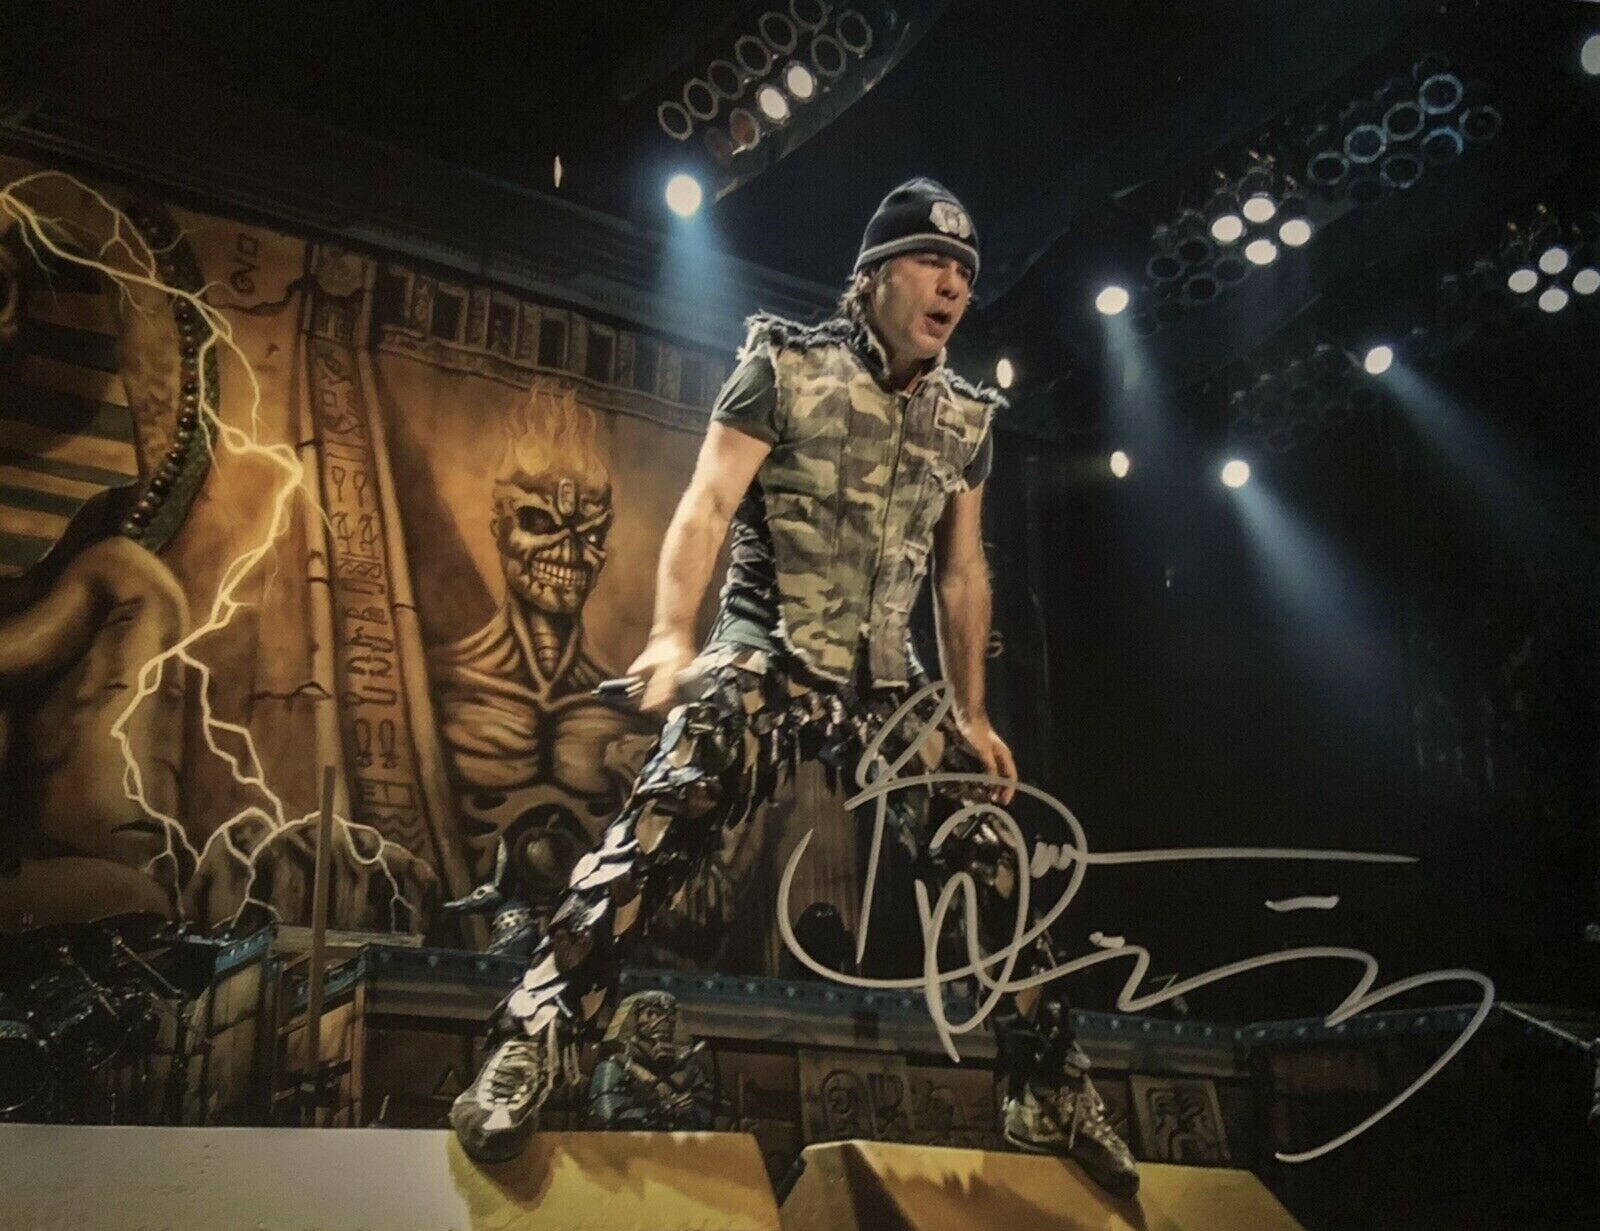 Bruce Dickinson Autographed Signed 8x10 ( Iron Maiden ) Photo Reprint